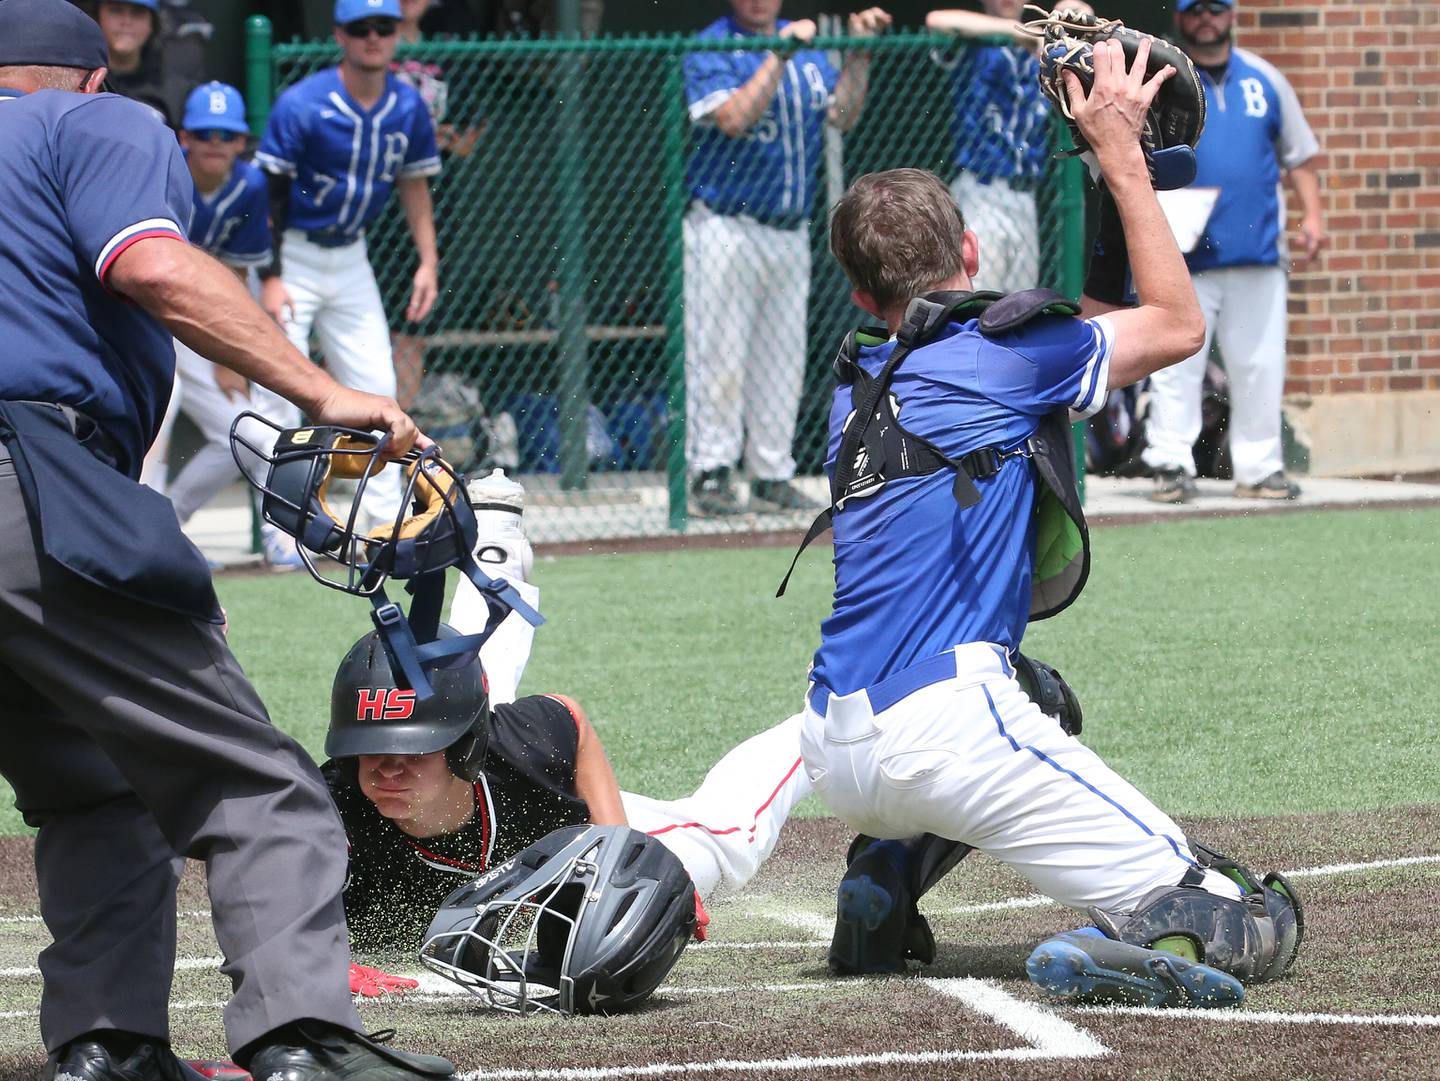 Henry-Senachwine's Preston Rowe scores the teams third run as Milford's catcher Sawyer Laffoon catches the late throw to the plate during the Class 1A Supersectional game on Monday, May 29, 2023 at Illinois Wesleyan University in Bloomington.